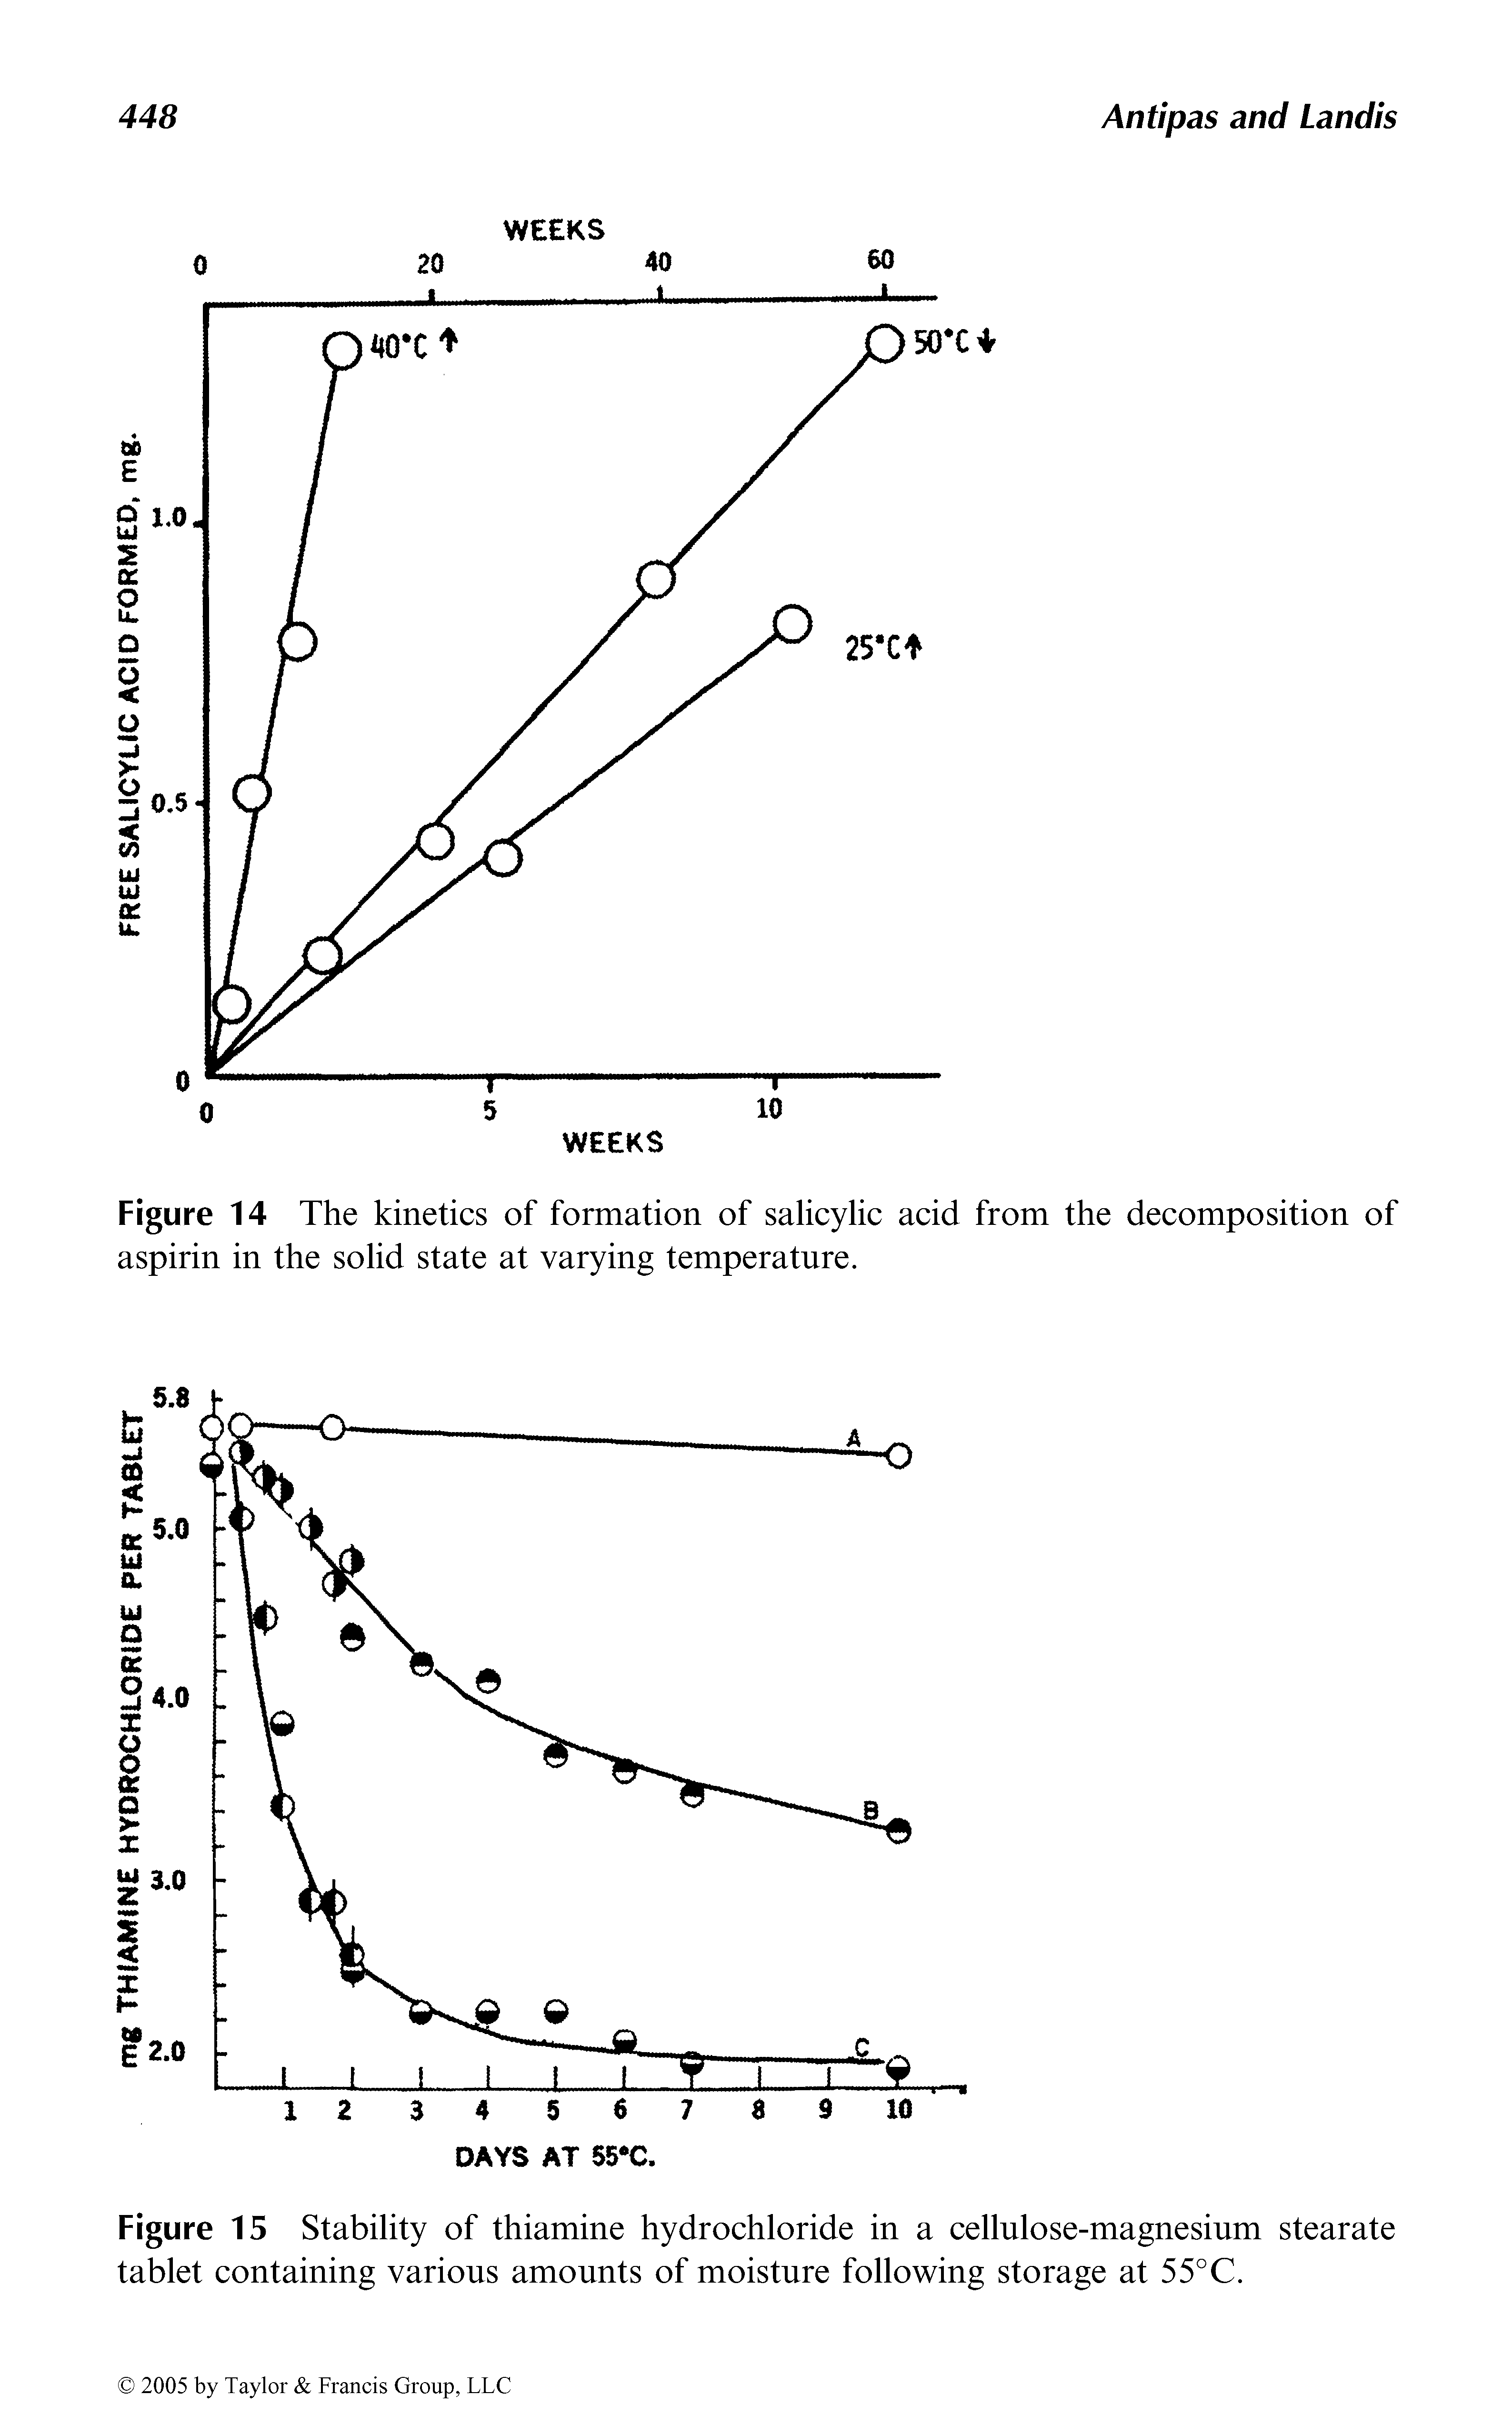 Figure 15 Stability of thiamine hydrochloride in a cellulose-magnesium stearate tablet containing various amounts of moisture following storage at 55°C.